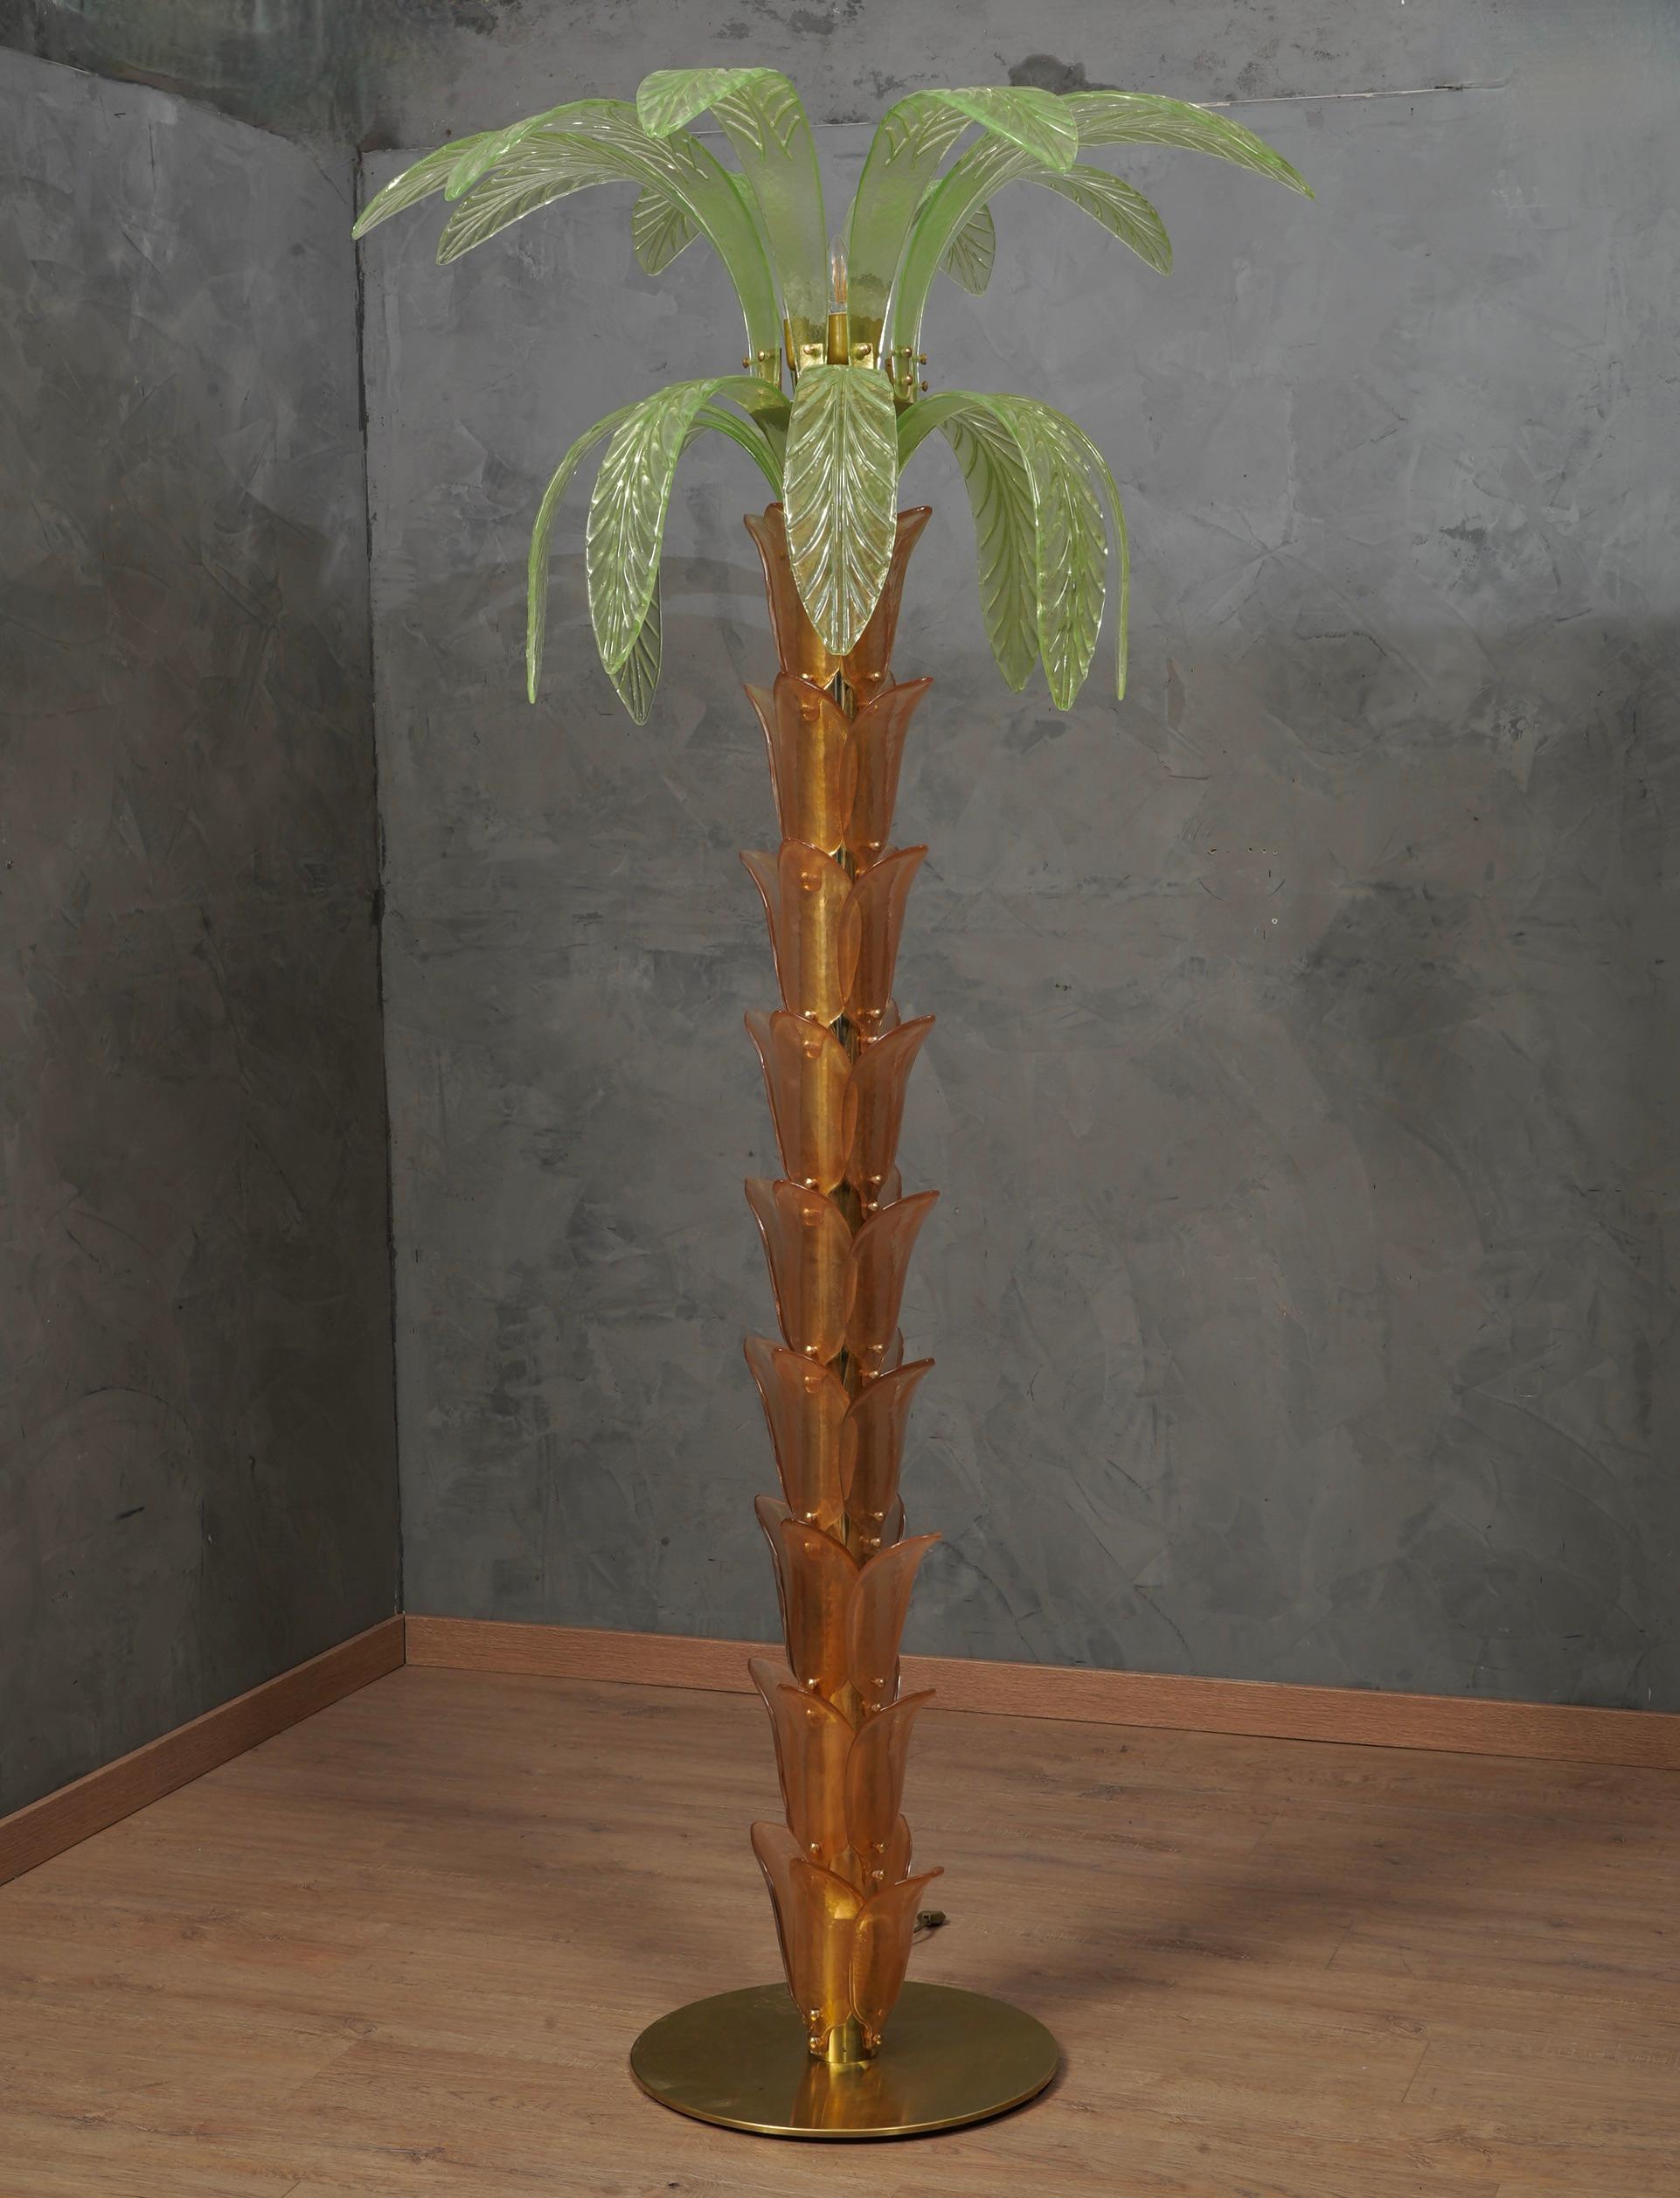 Superb and charming floor lamp in Murano glass in a beautiful green and smoked color. Very very elegant piece of furniture.

The floor lamp is composed of a round base and a brass stem on which 36 small smoked Murano glass leaves have been attached;